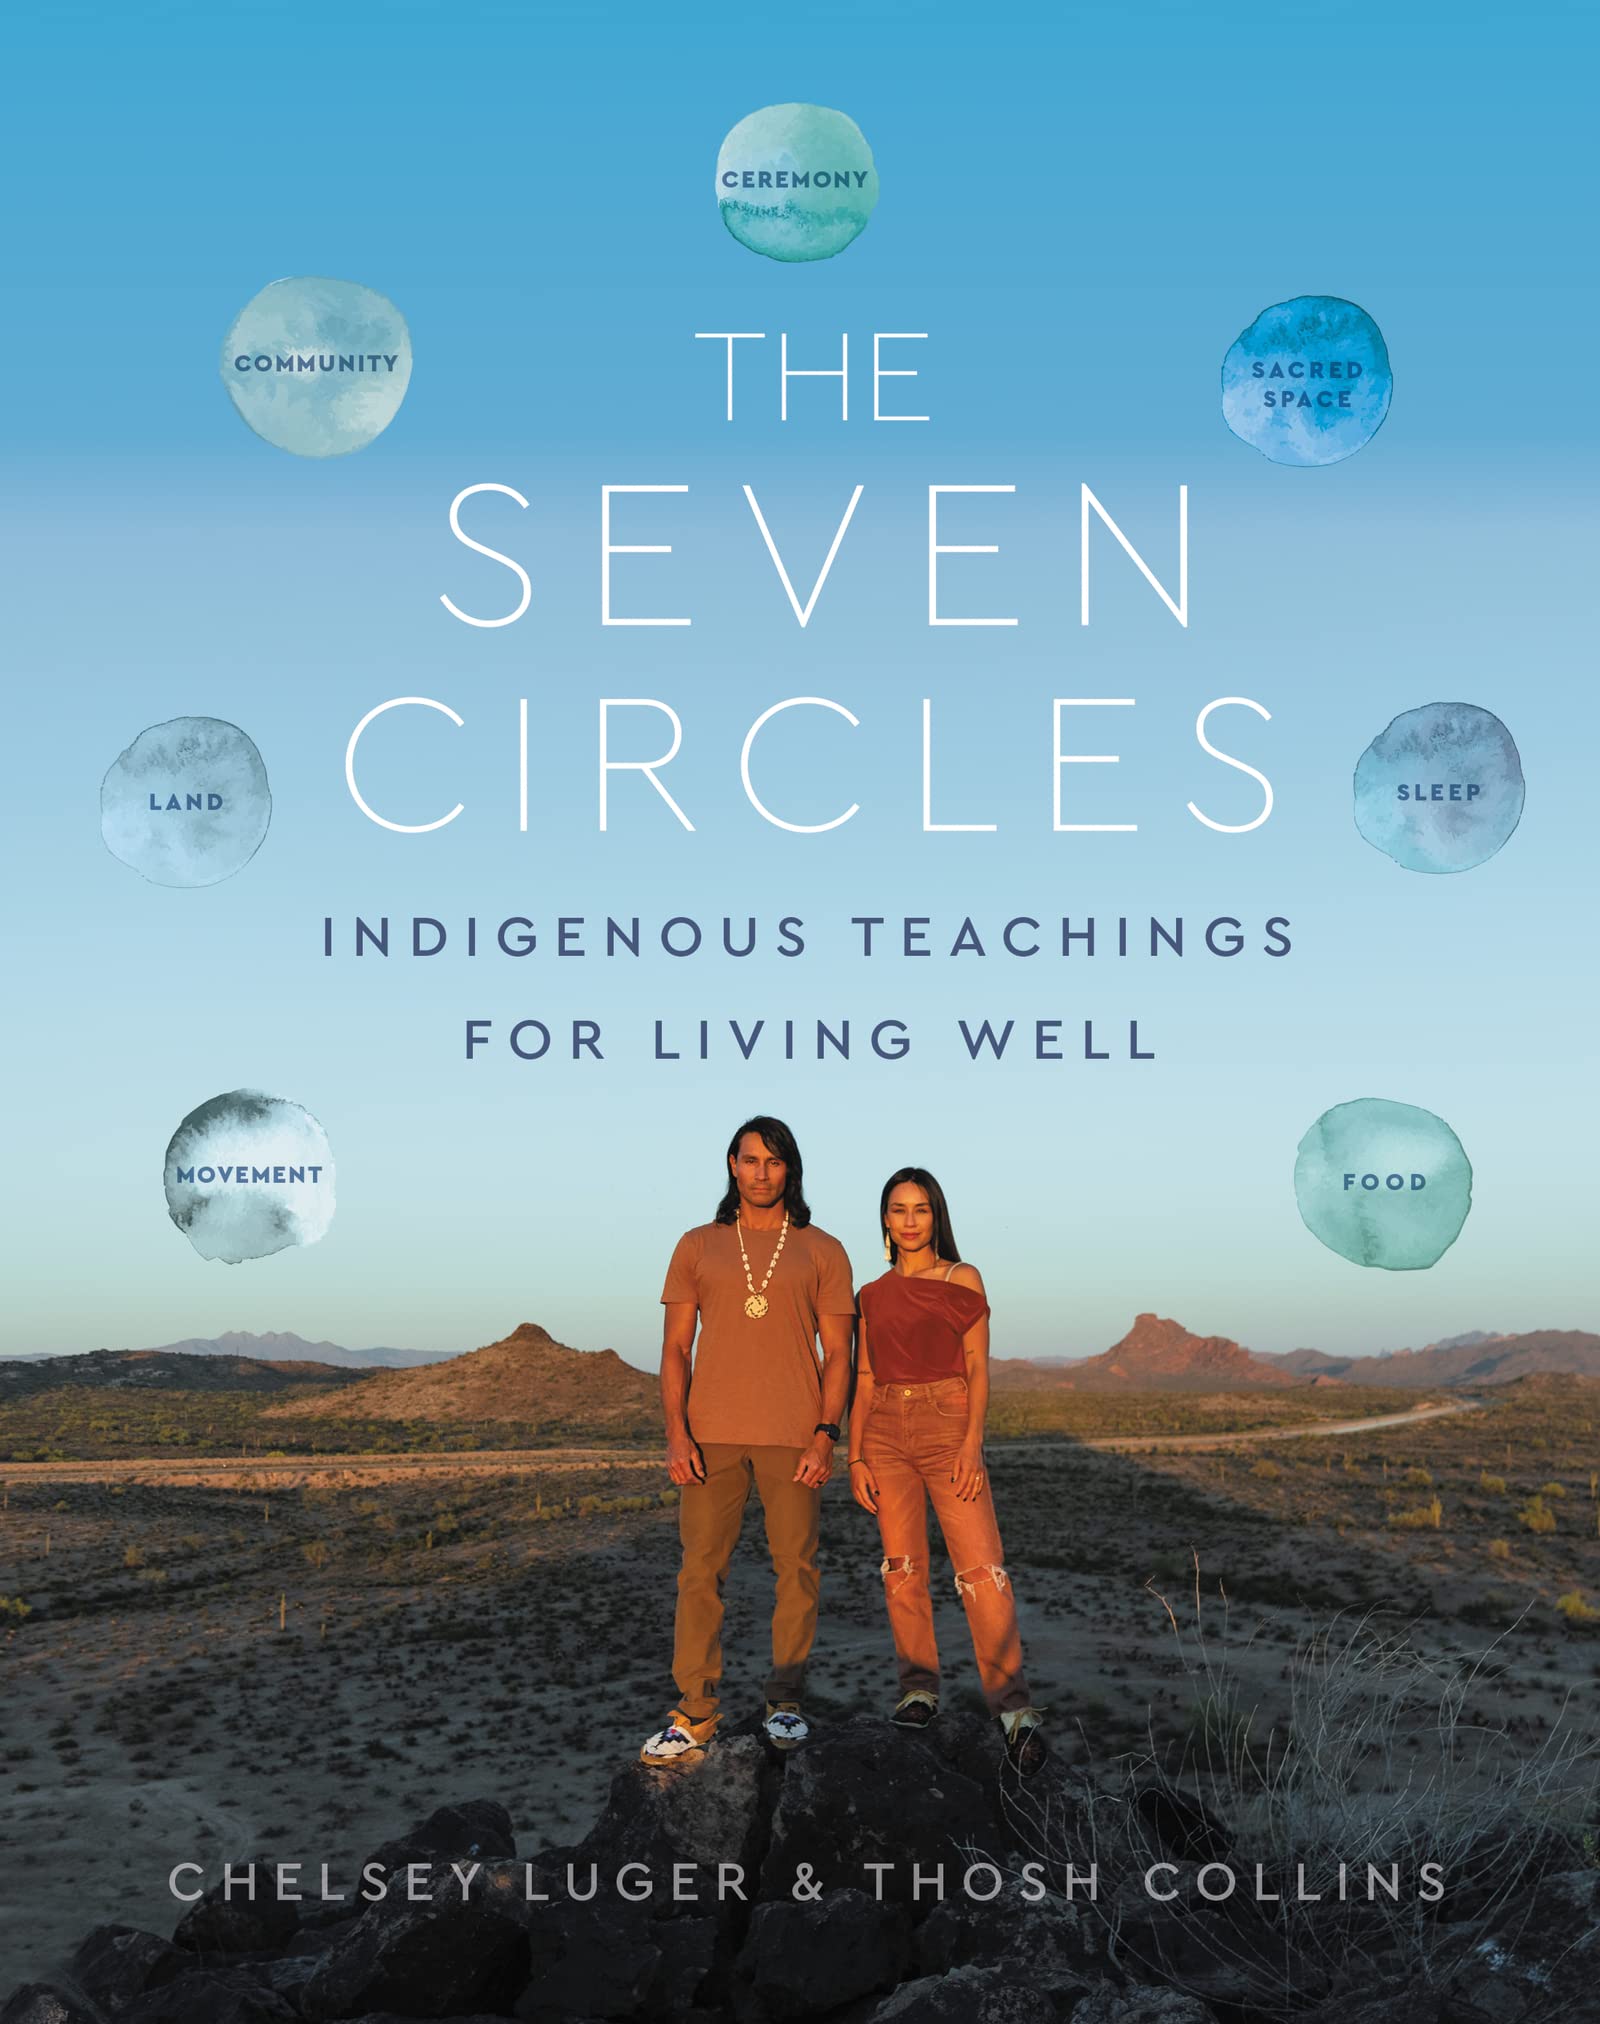 The Seven Circles: Indigenous Teachings for Living Well by Chelsea Luger, Thosh Collins. 